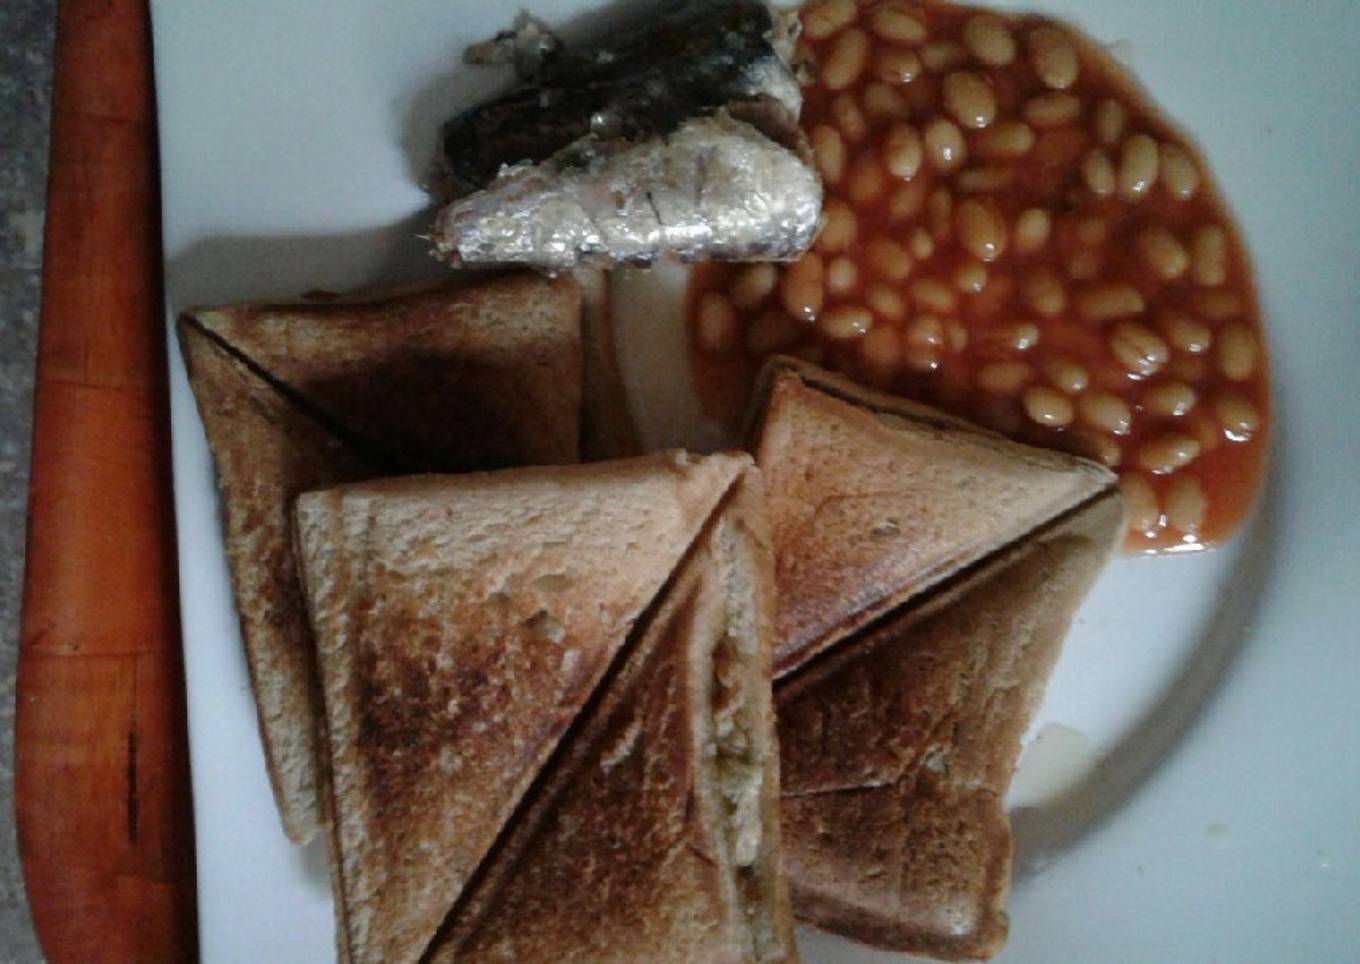 Scrambled eggs in a Toast with sardine and baked beans